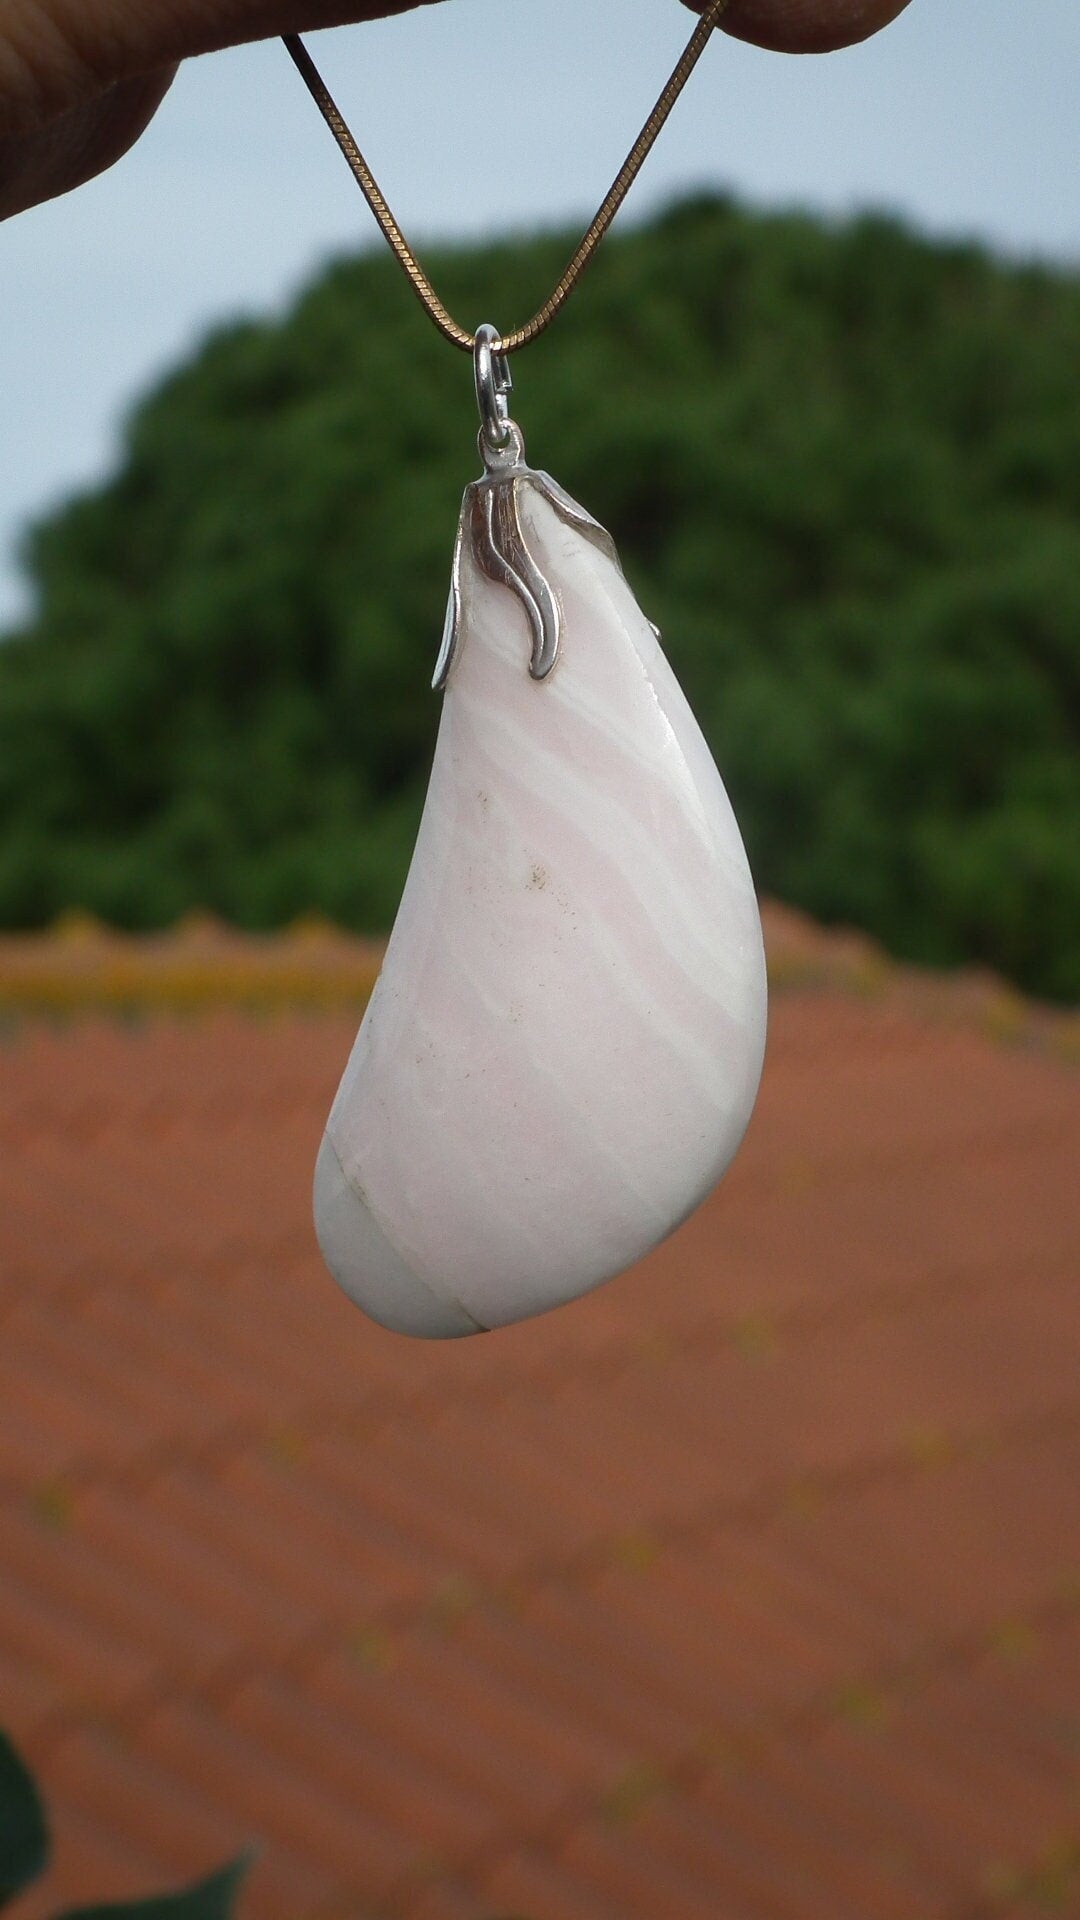 Mangano calcite pendant with silverplated